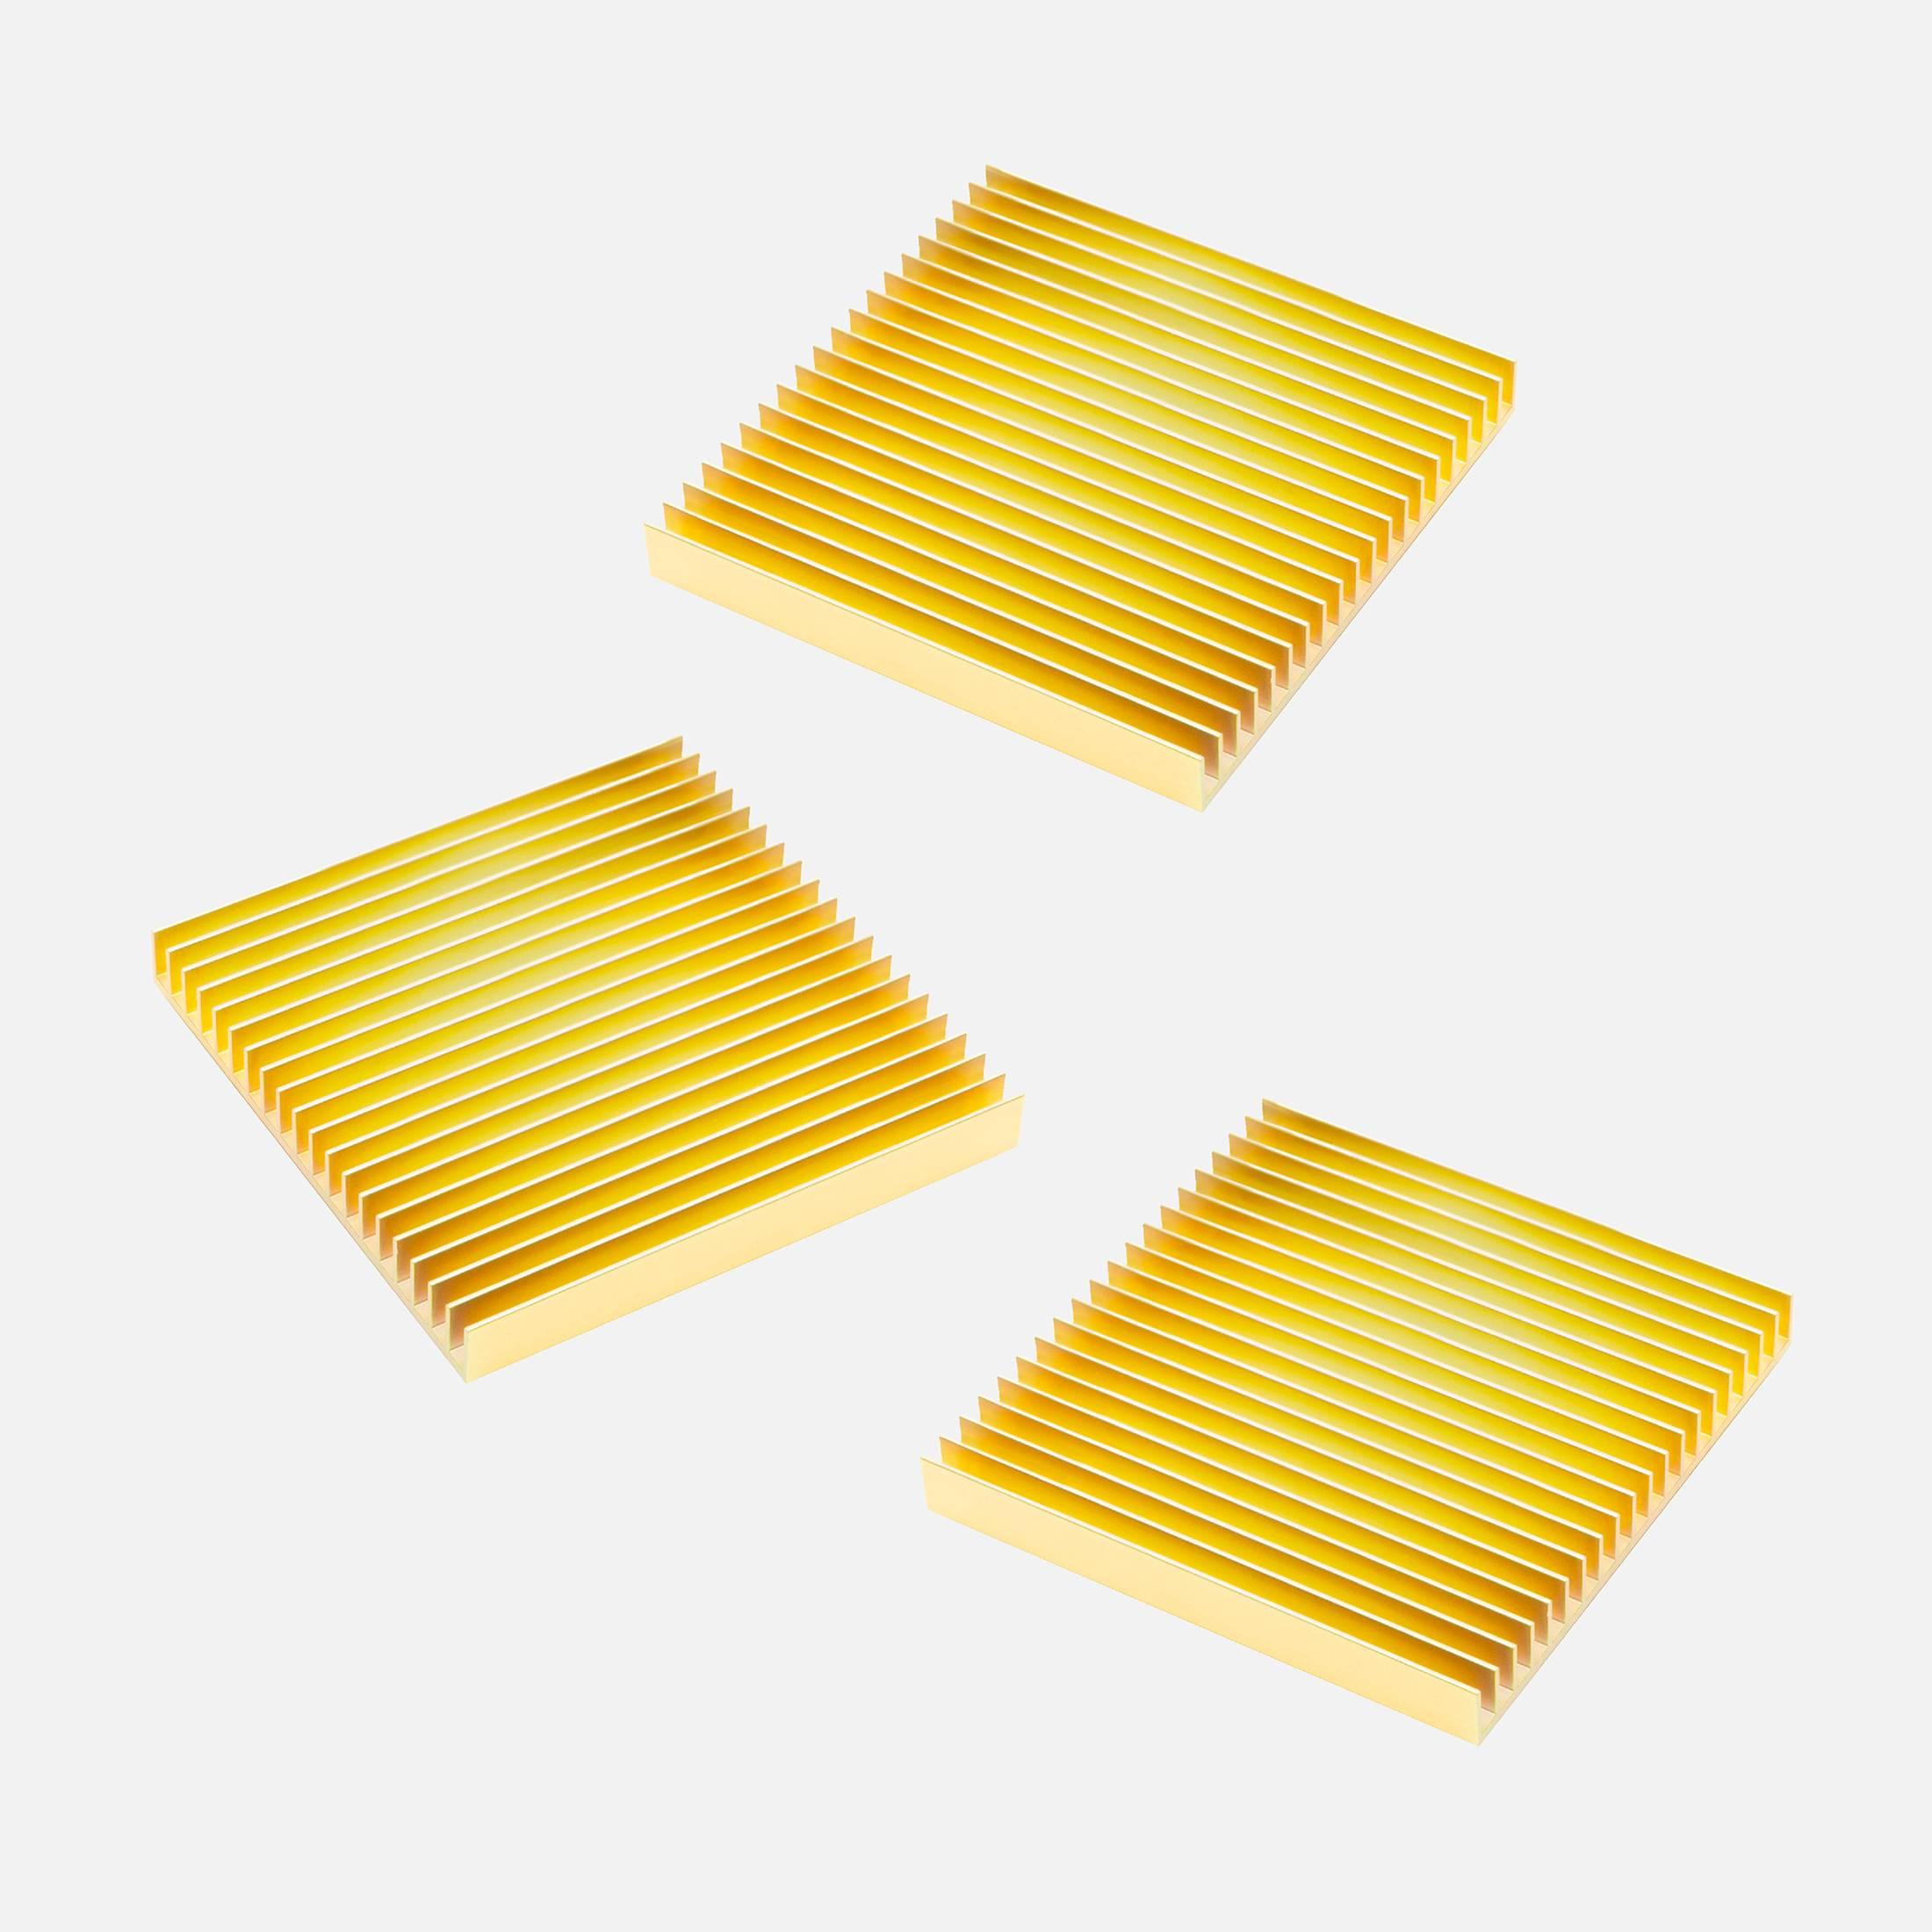 Made using a manufacturing process utilized for railways, medical devices, and electronics, the Fin Trivets bring an Industrial touch to your tabletop. Both durable and multifunctional, the Fin Trivets provide the perfect platform to organize your